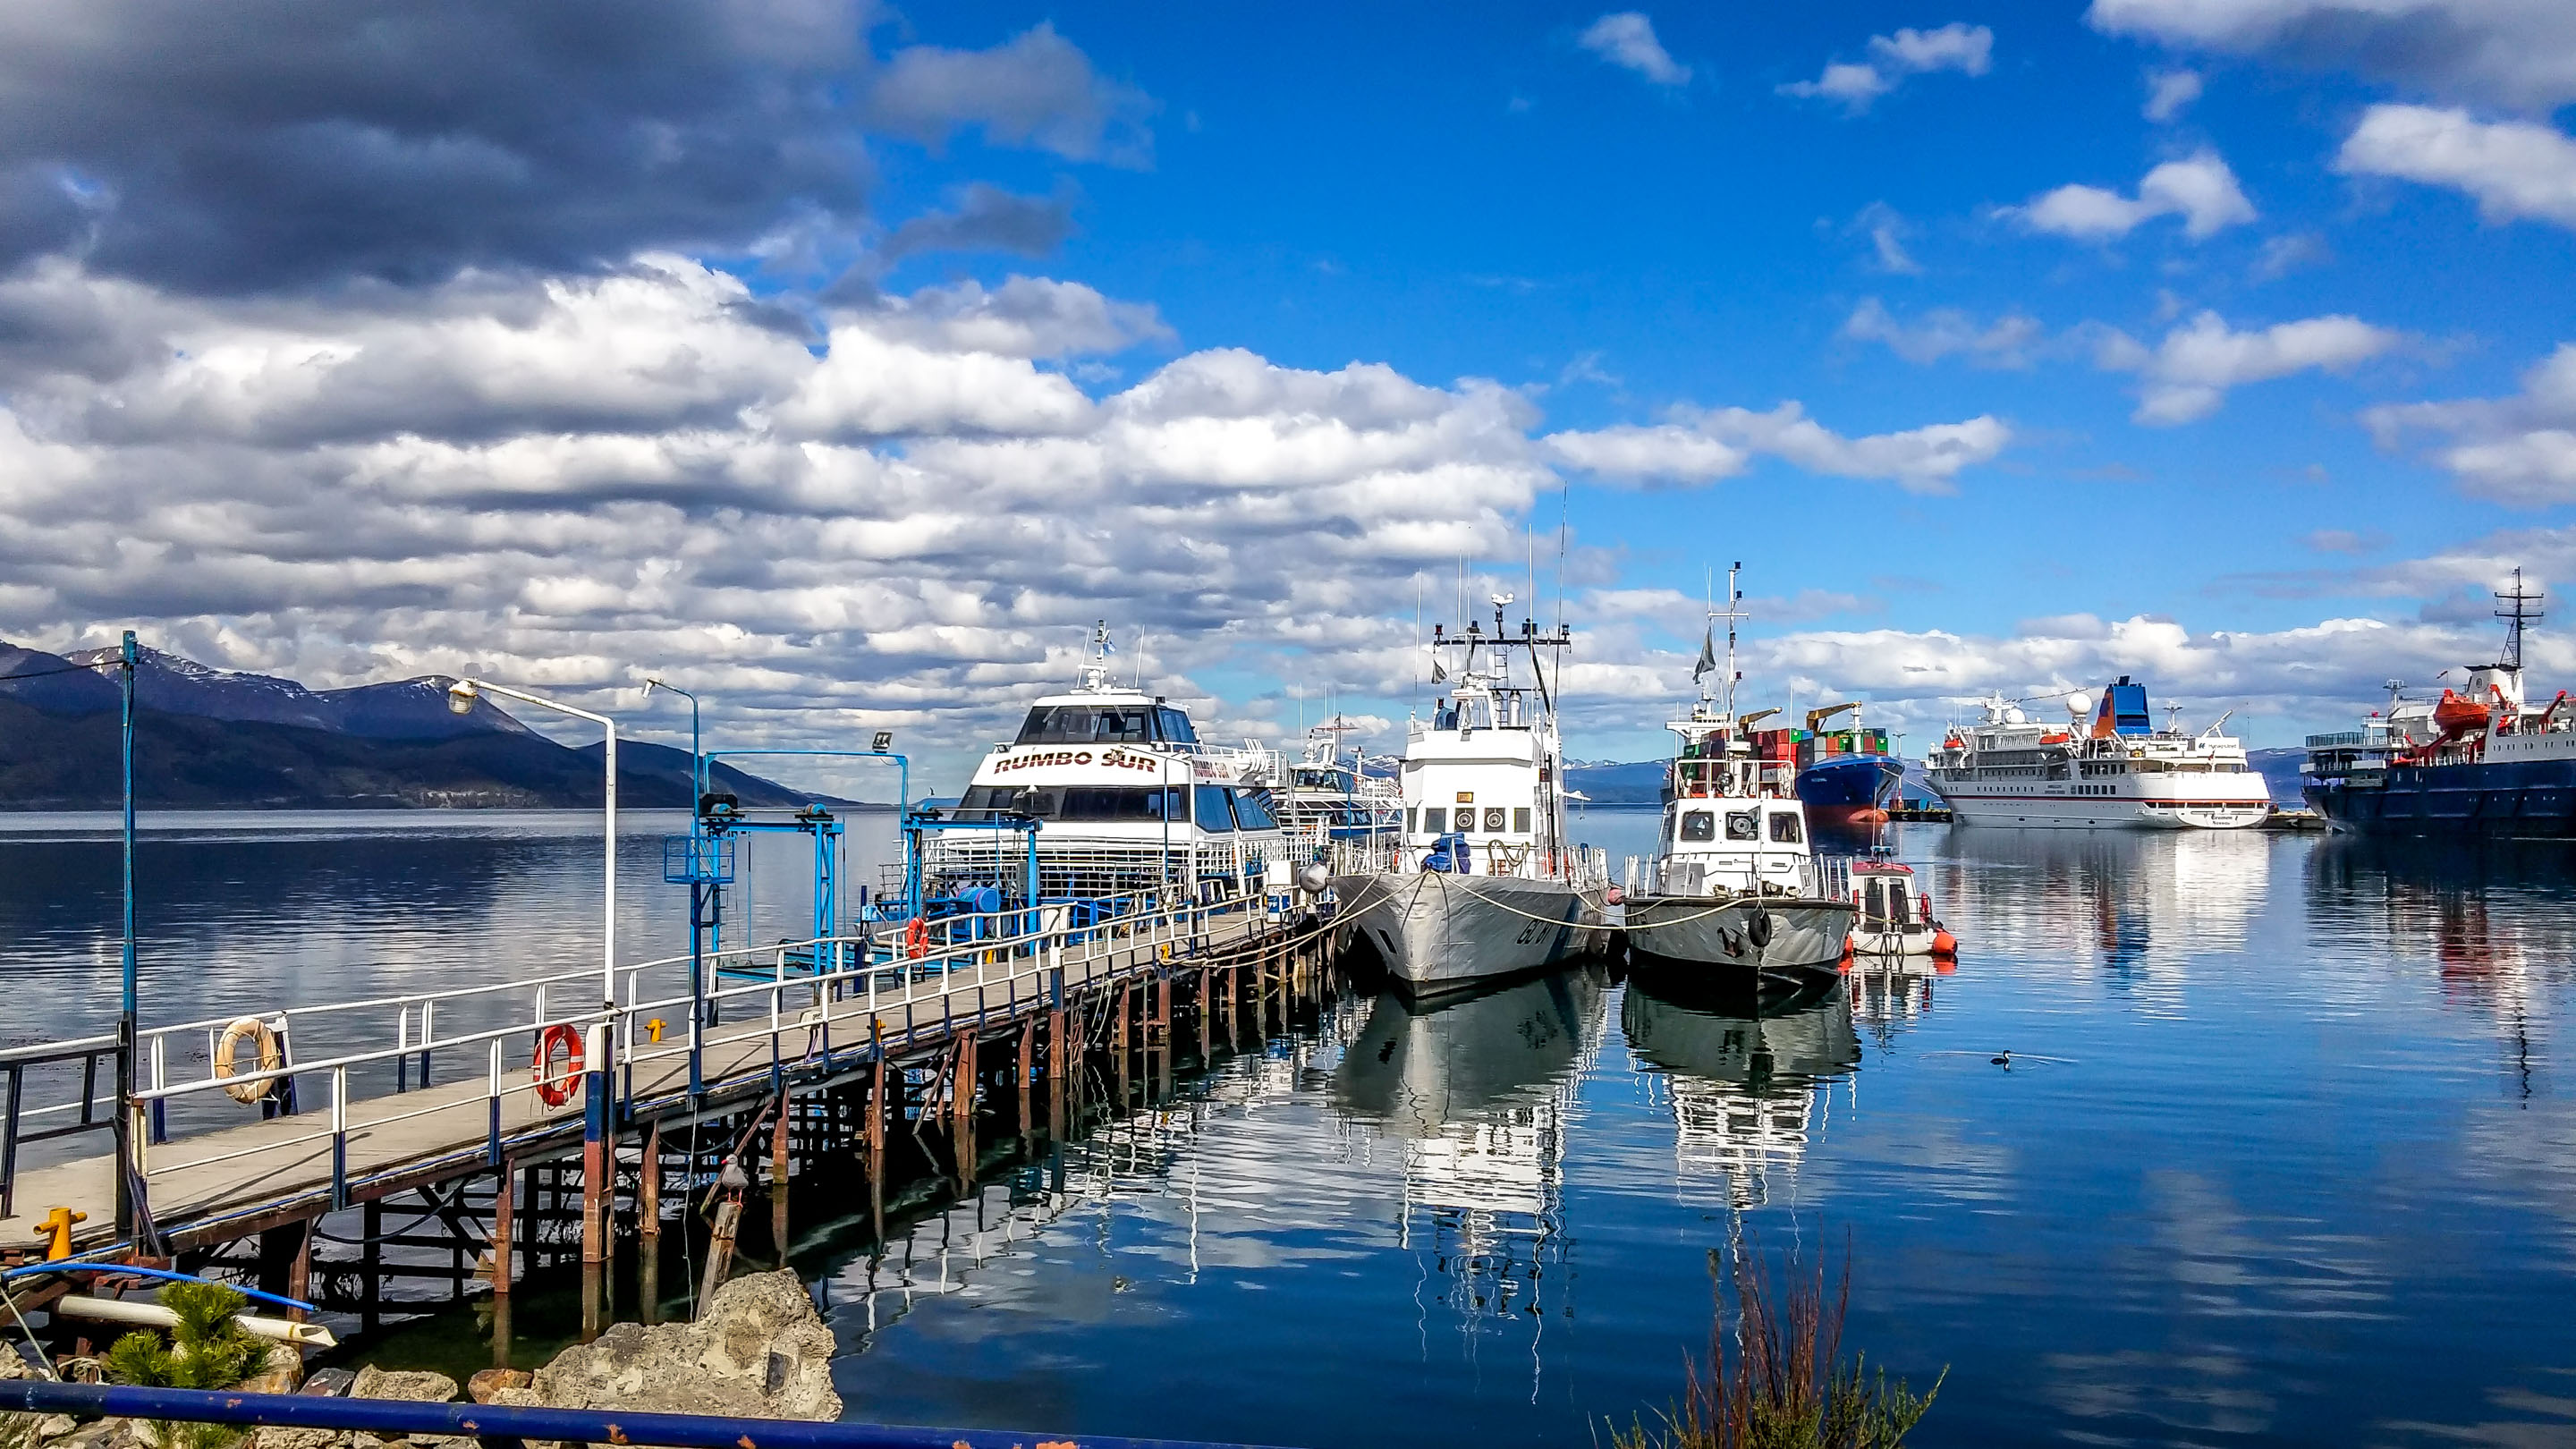 General 2880x1620 ushuaia Patagonia boat water clouds outdoors vehicle